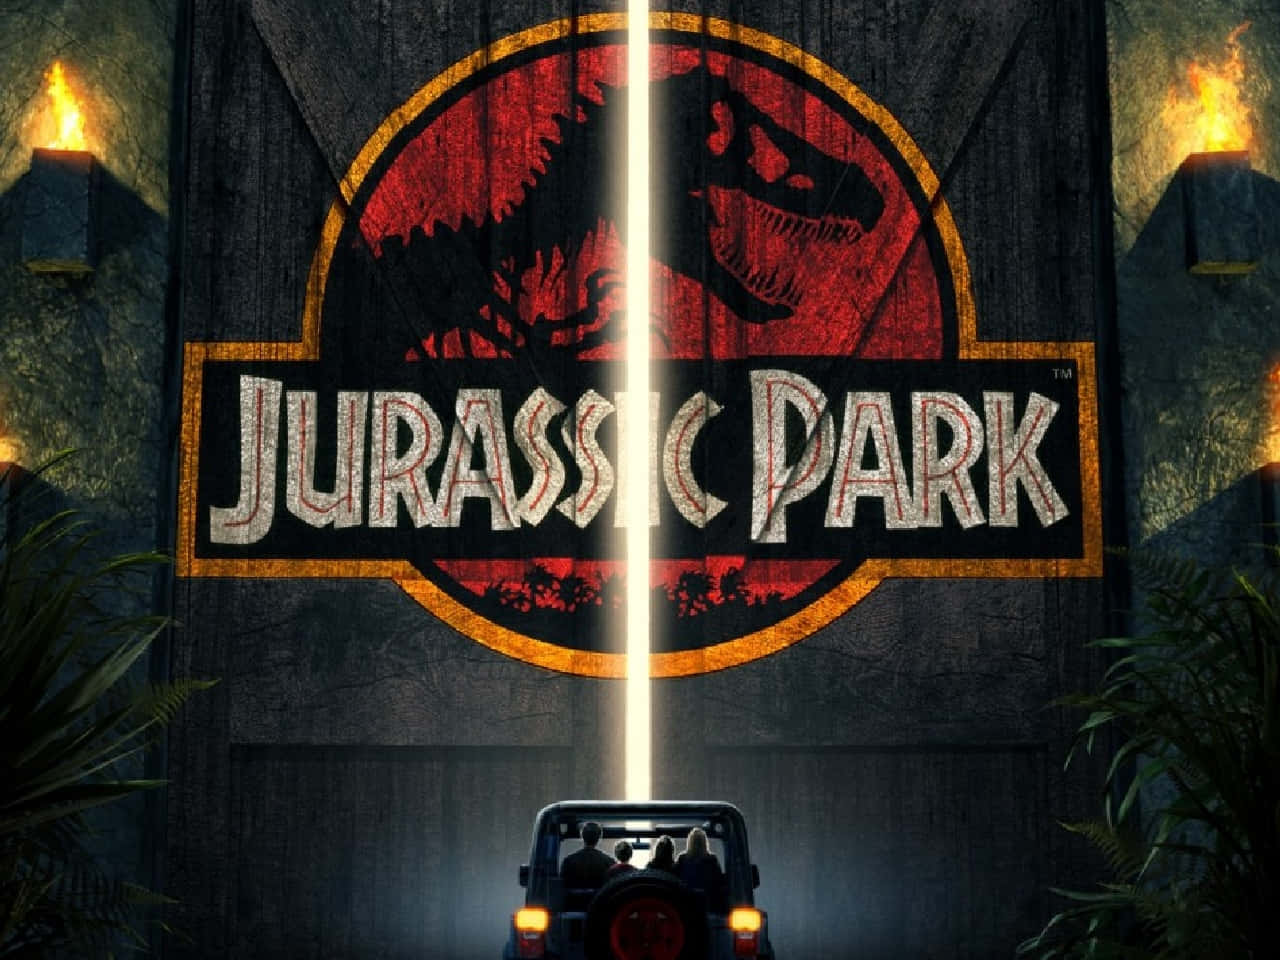 "Escape to a prehistoric world with Jurassic Park Zoom!"